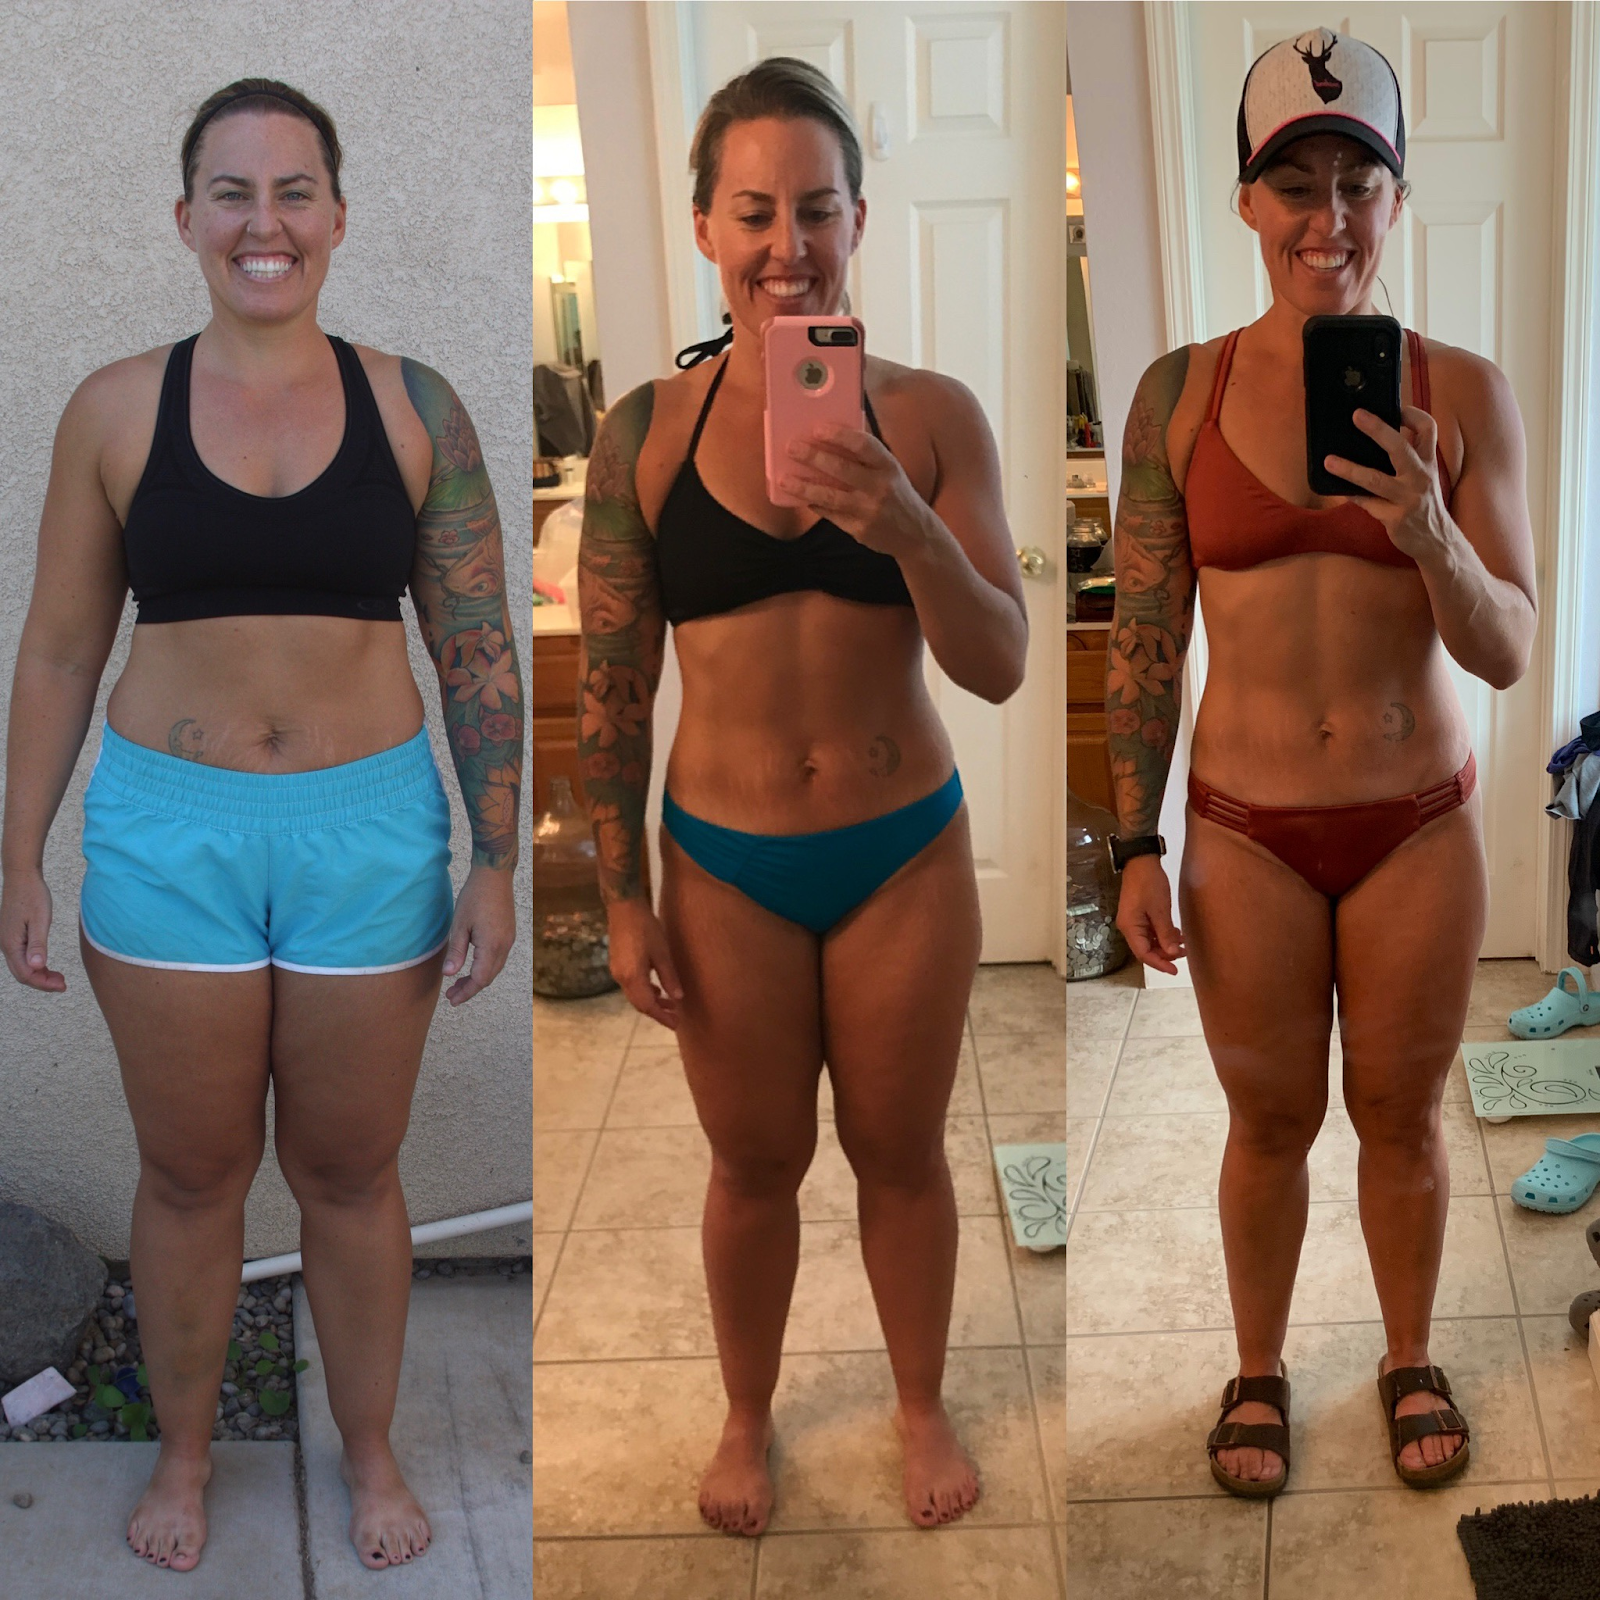 Shawna Crushed Her Weight Loss Goals With 6 Simple Tips